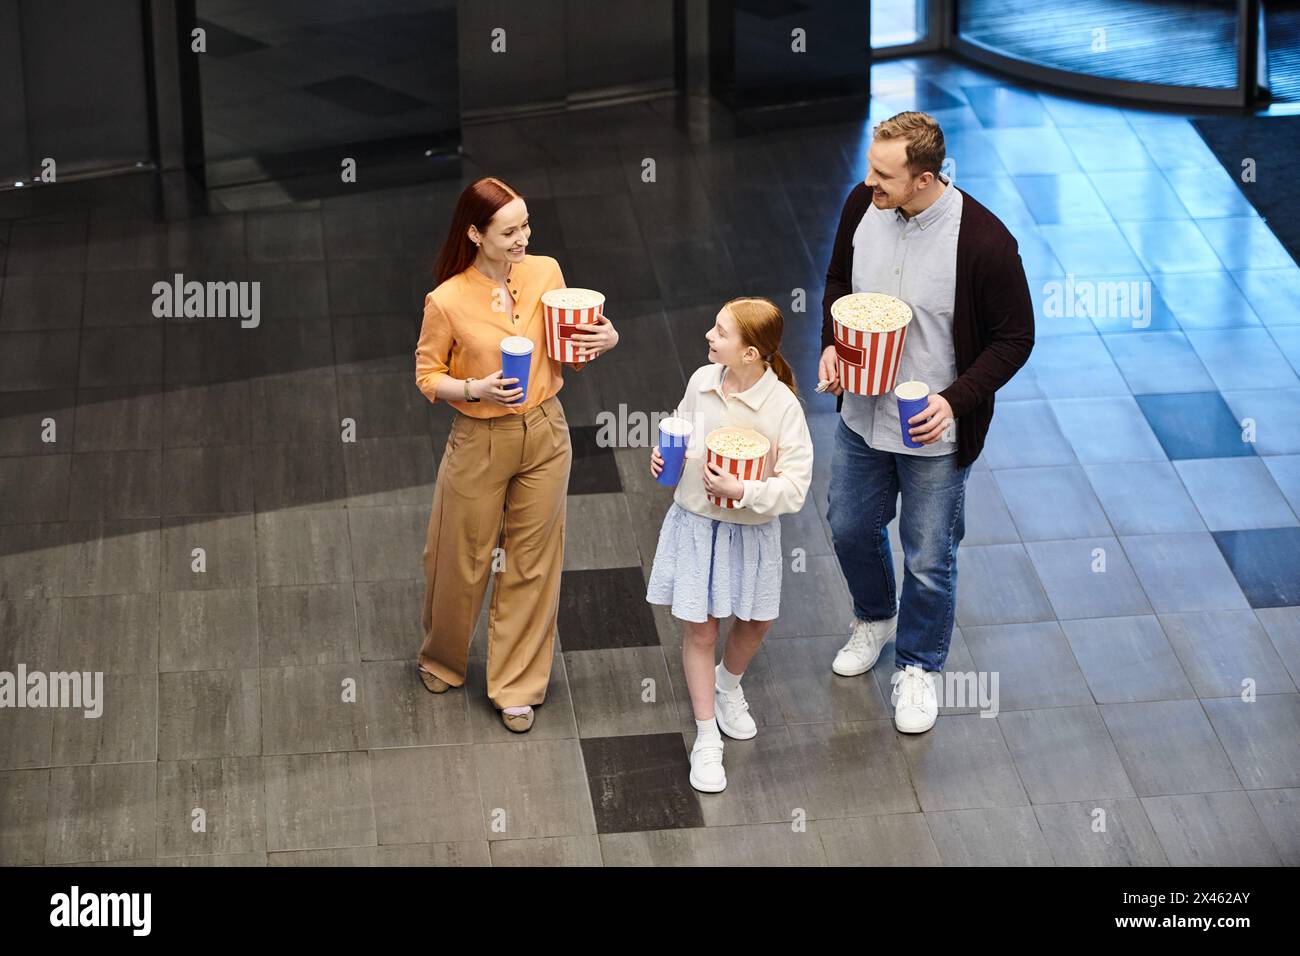 father and son hold popcorn while a little girl stands next to them at the cinema, enjoying a happy family moment. Stock Photo